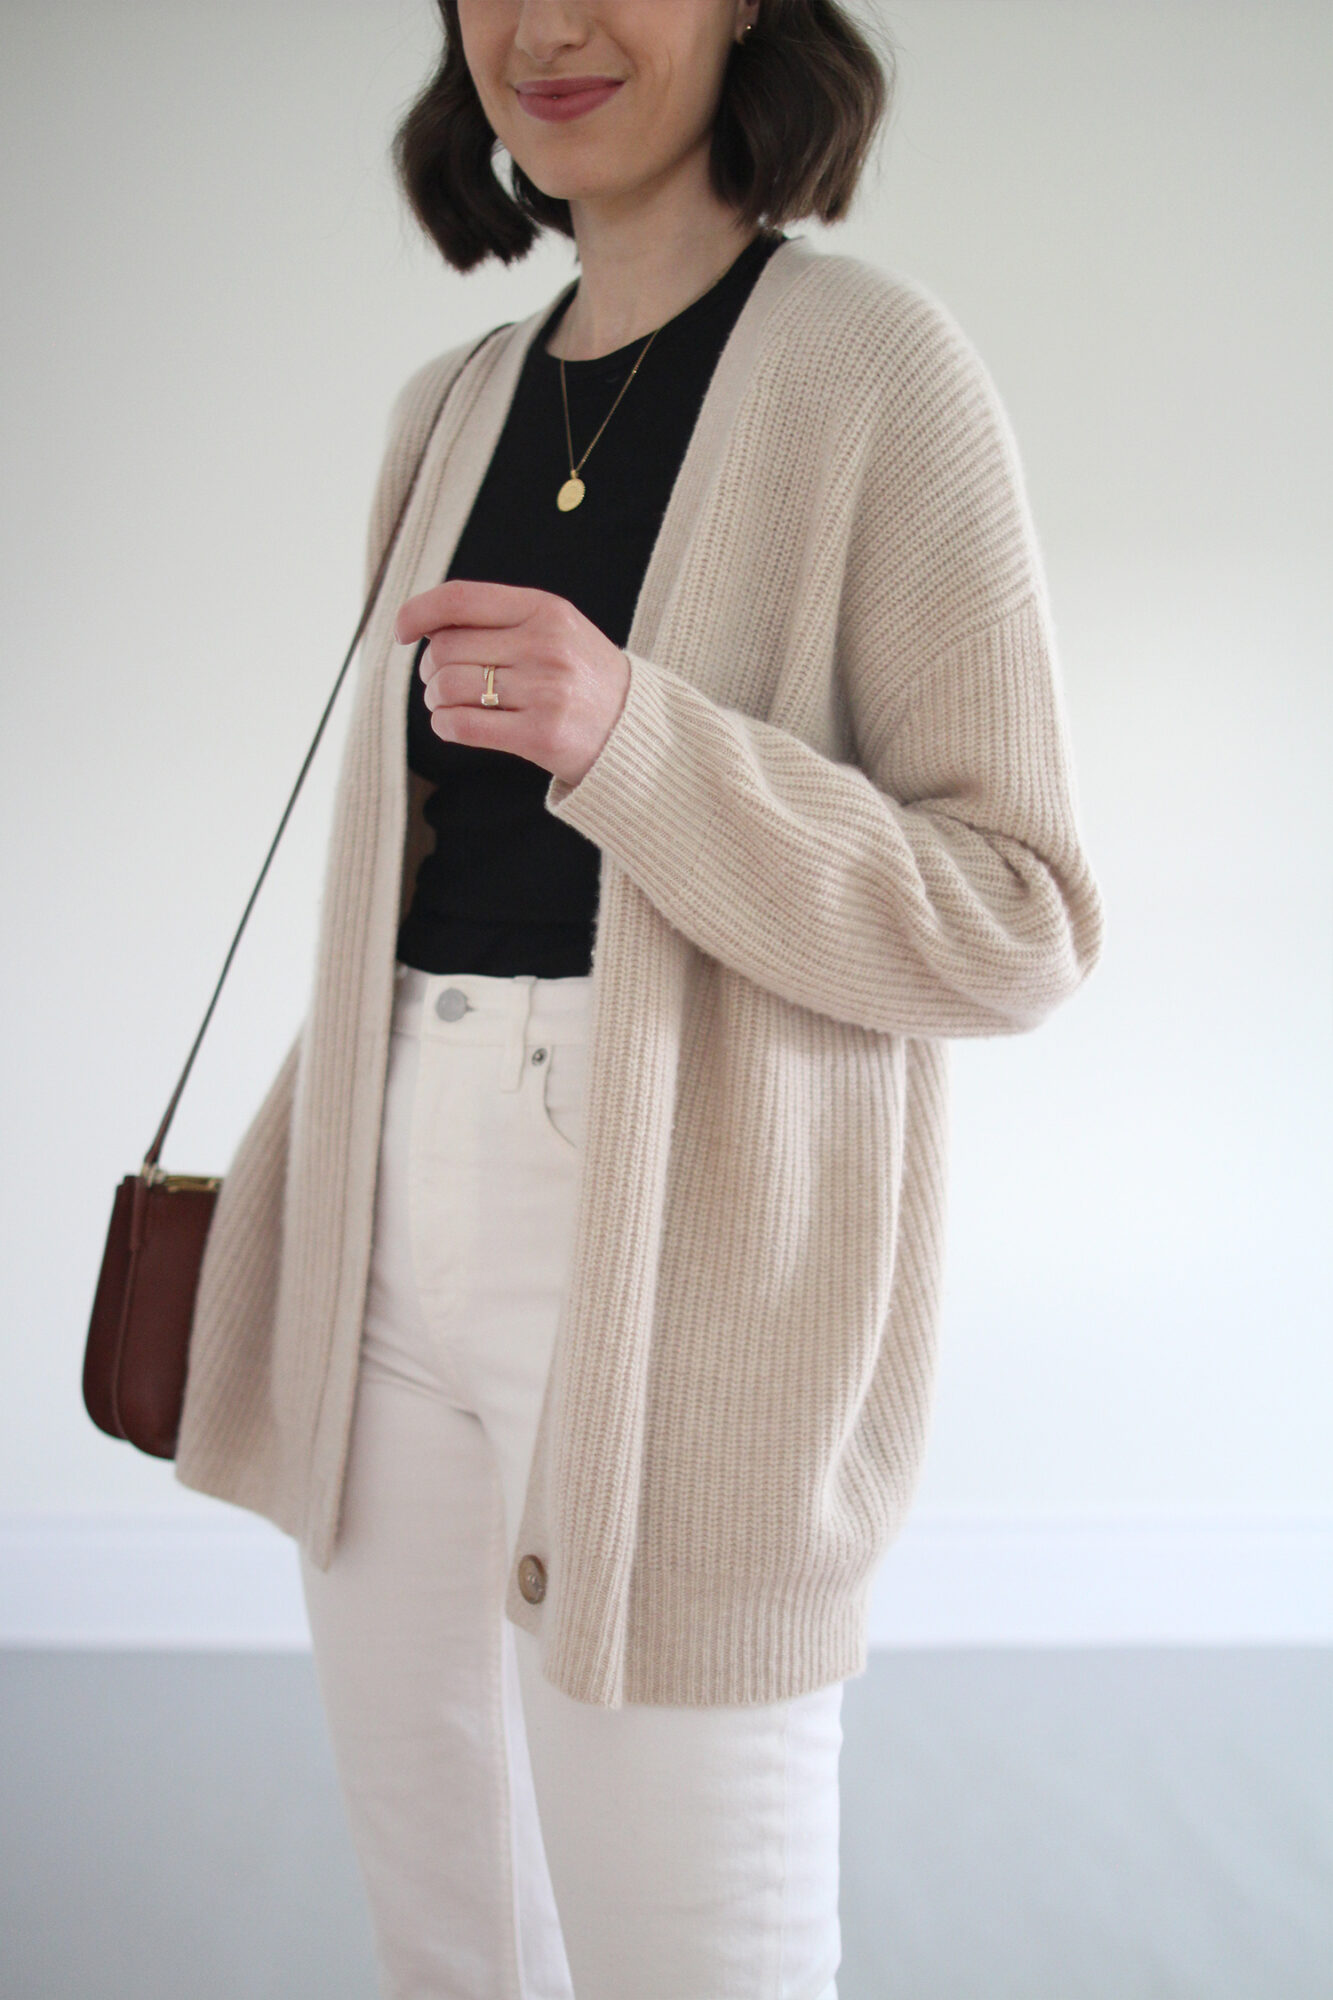 Style Bee - White Jeans and a Light Cardigan